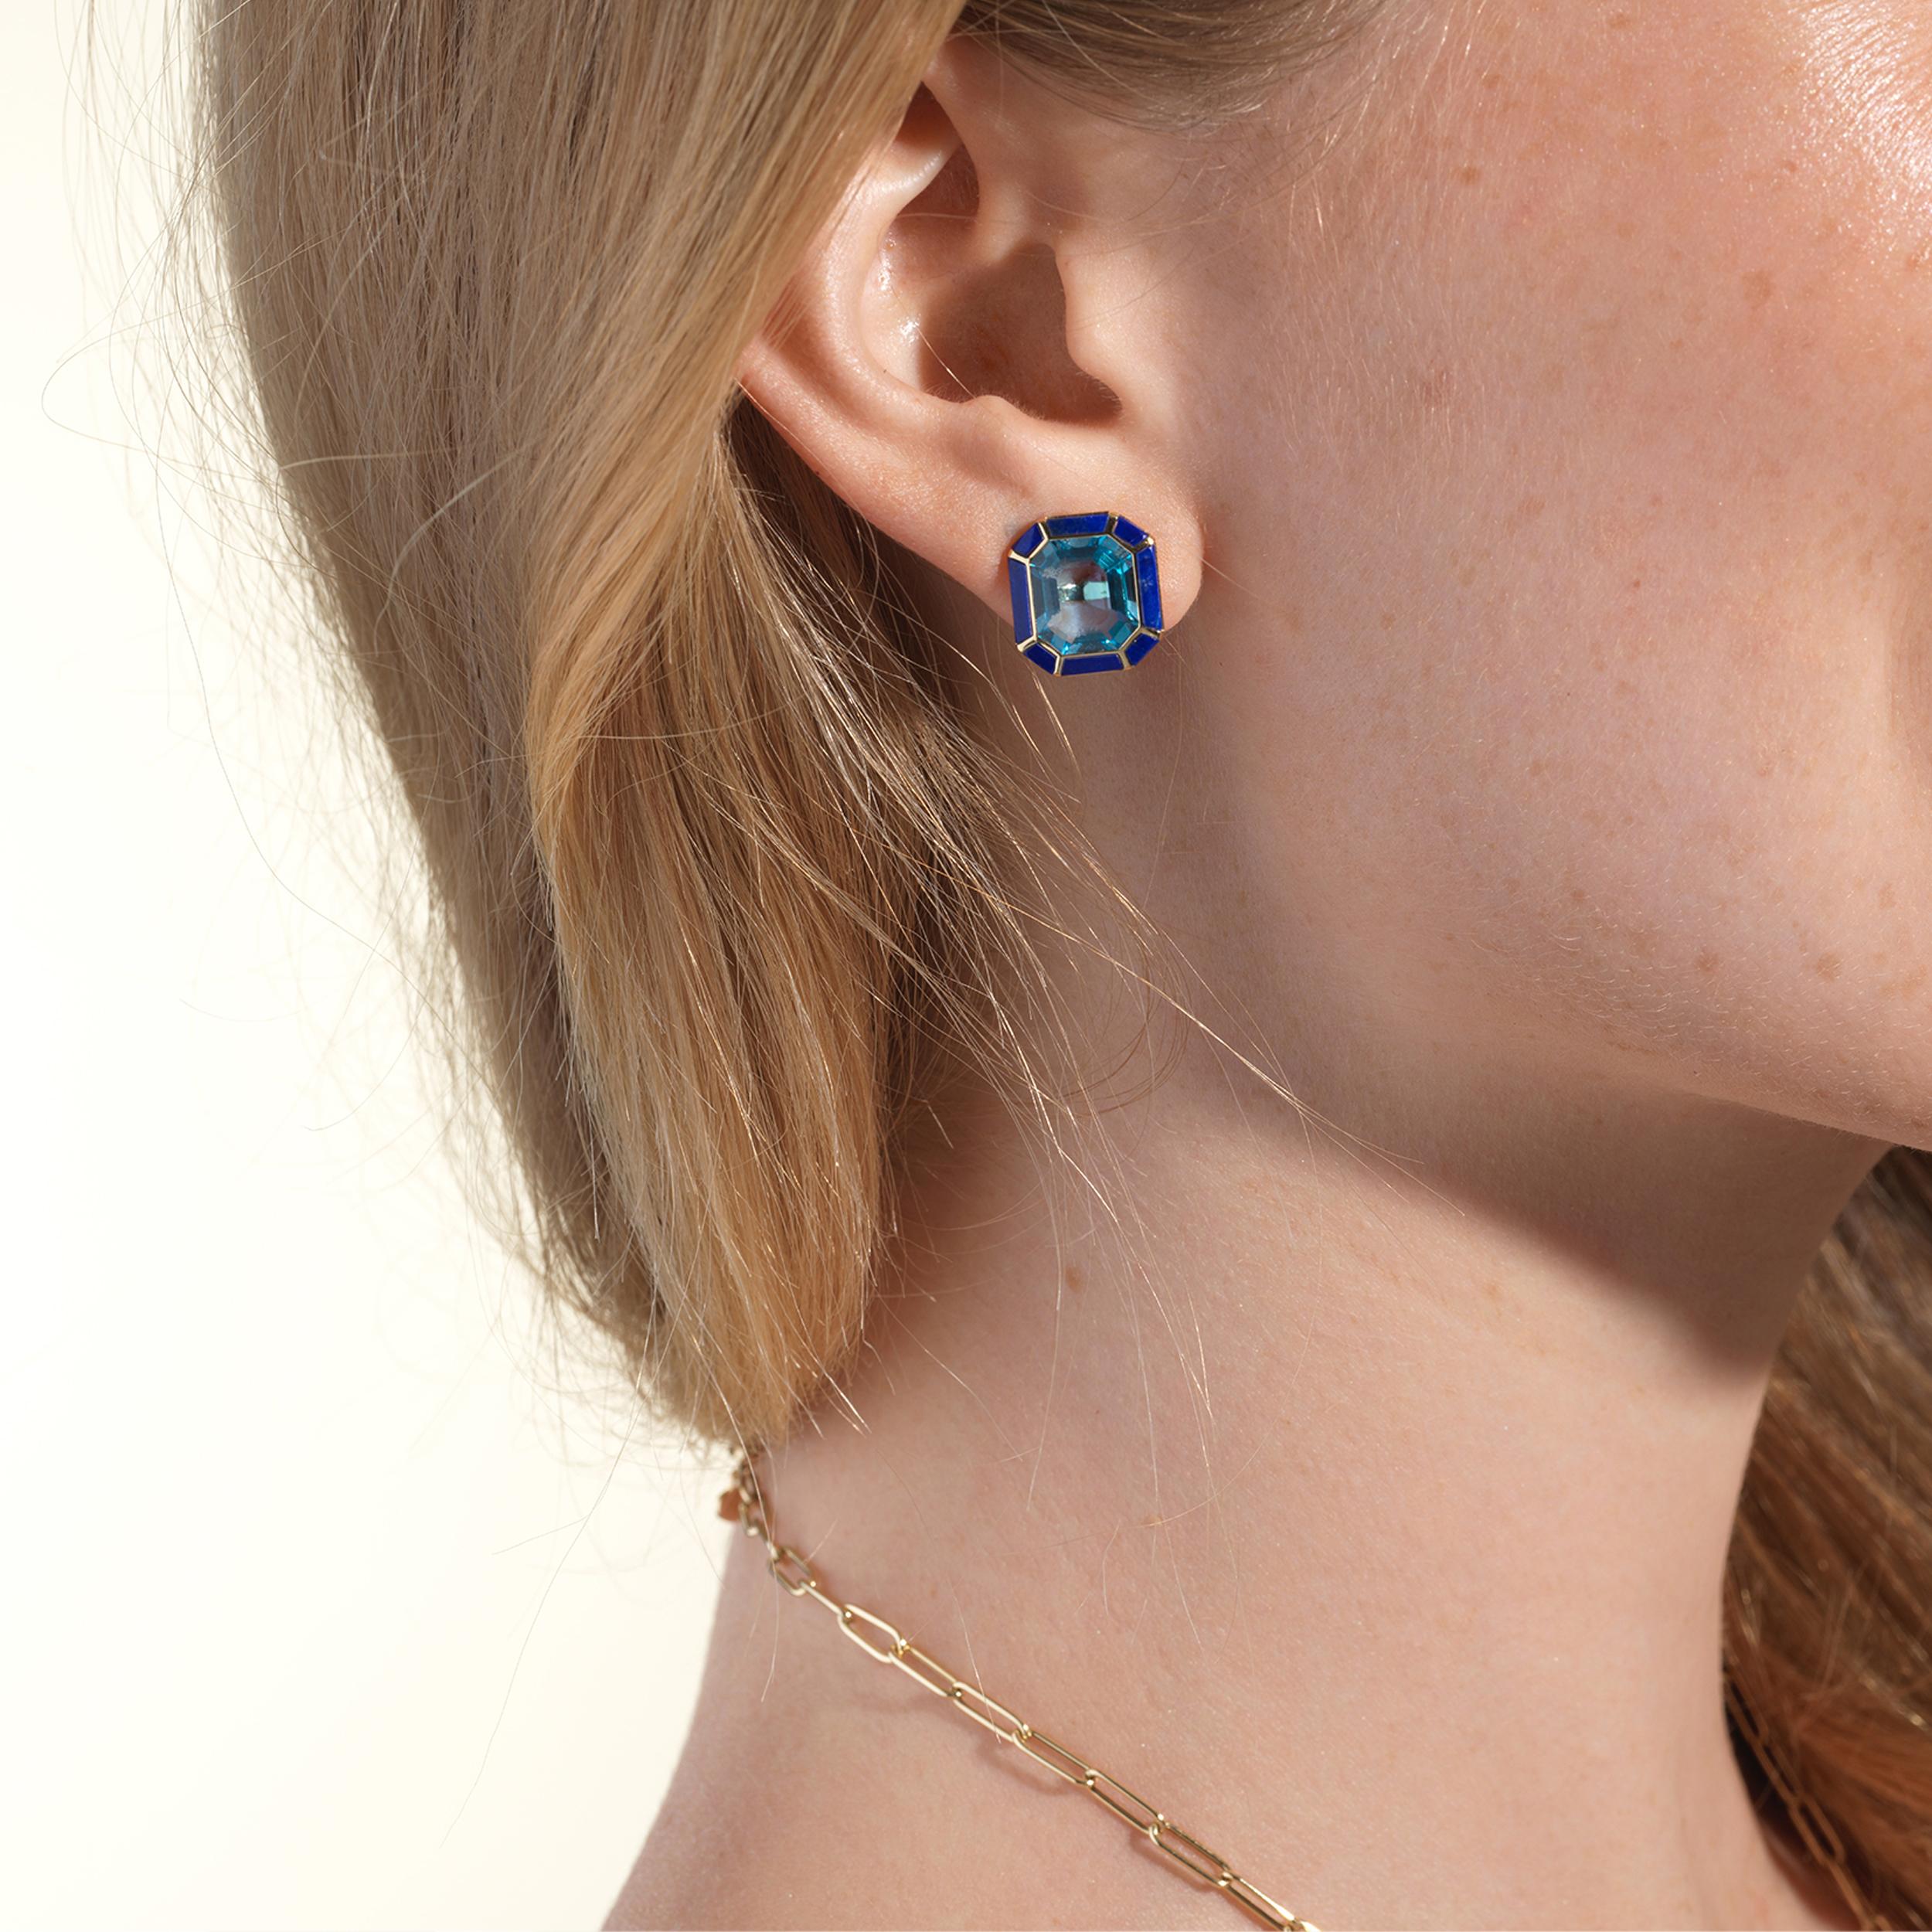 The Blue Topaz & Lapis Lazuli Stud Earrings from the 'Melange' Collection showcase a captivating blend of elegance and charm. Crafted with exquisite attention to detail, these earrings feature stunning emerald cut Blue Topaz and Lapis Lazuli